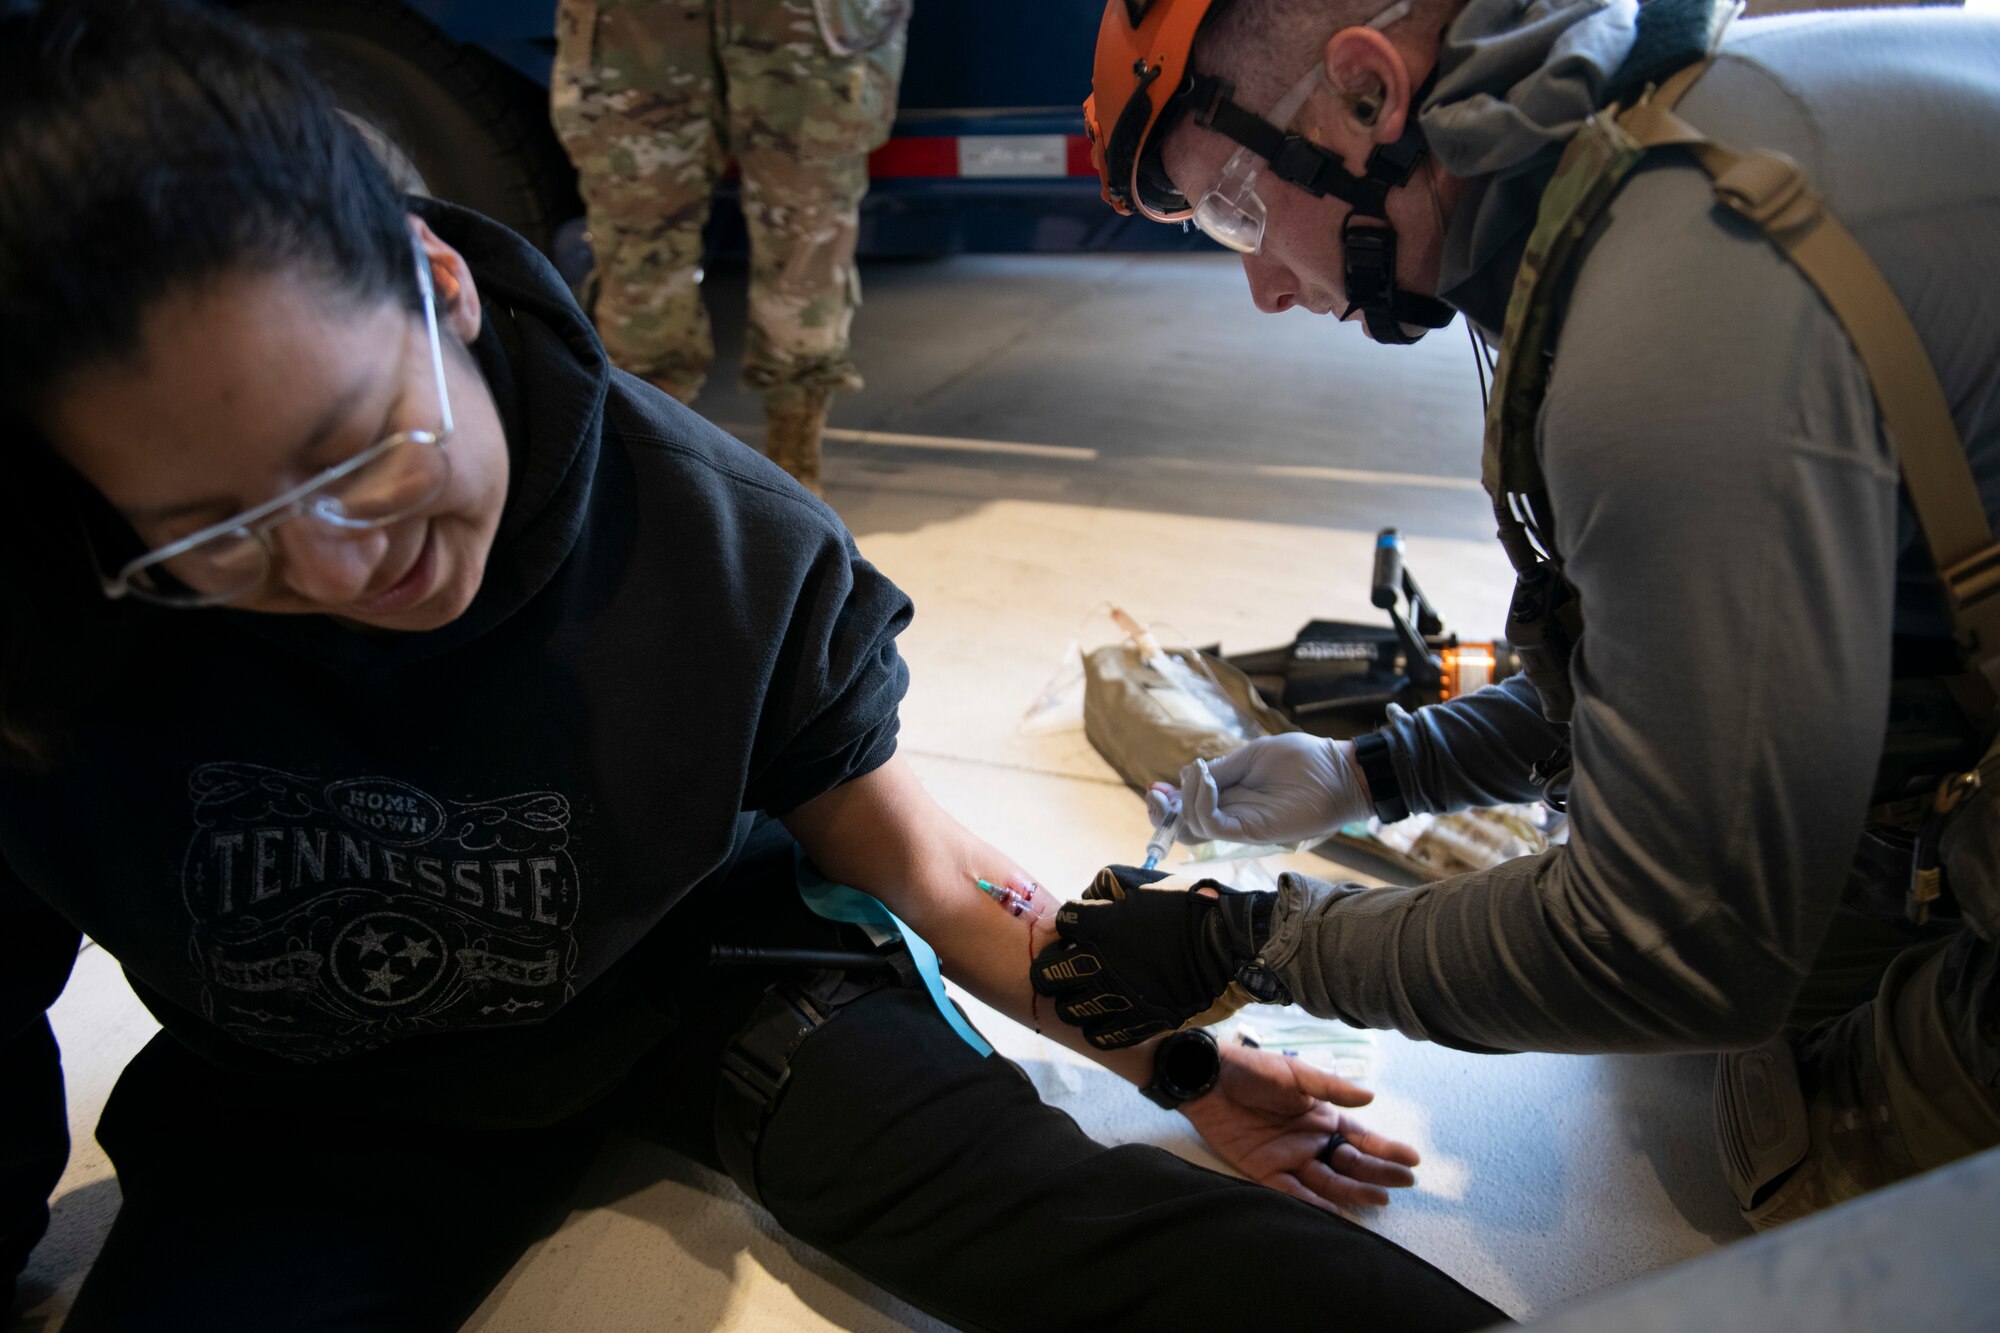 Airmen conducts simulated medical procedures on a simulated patient.